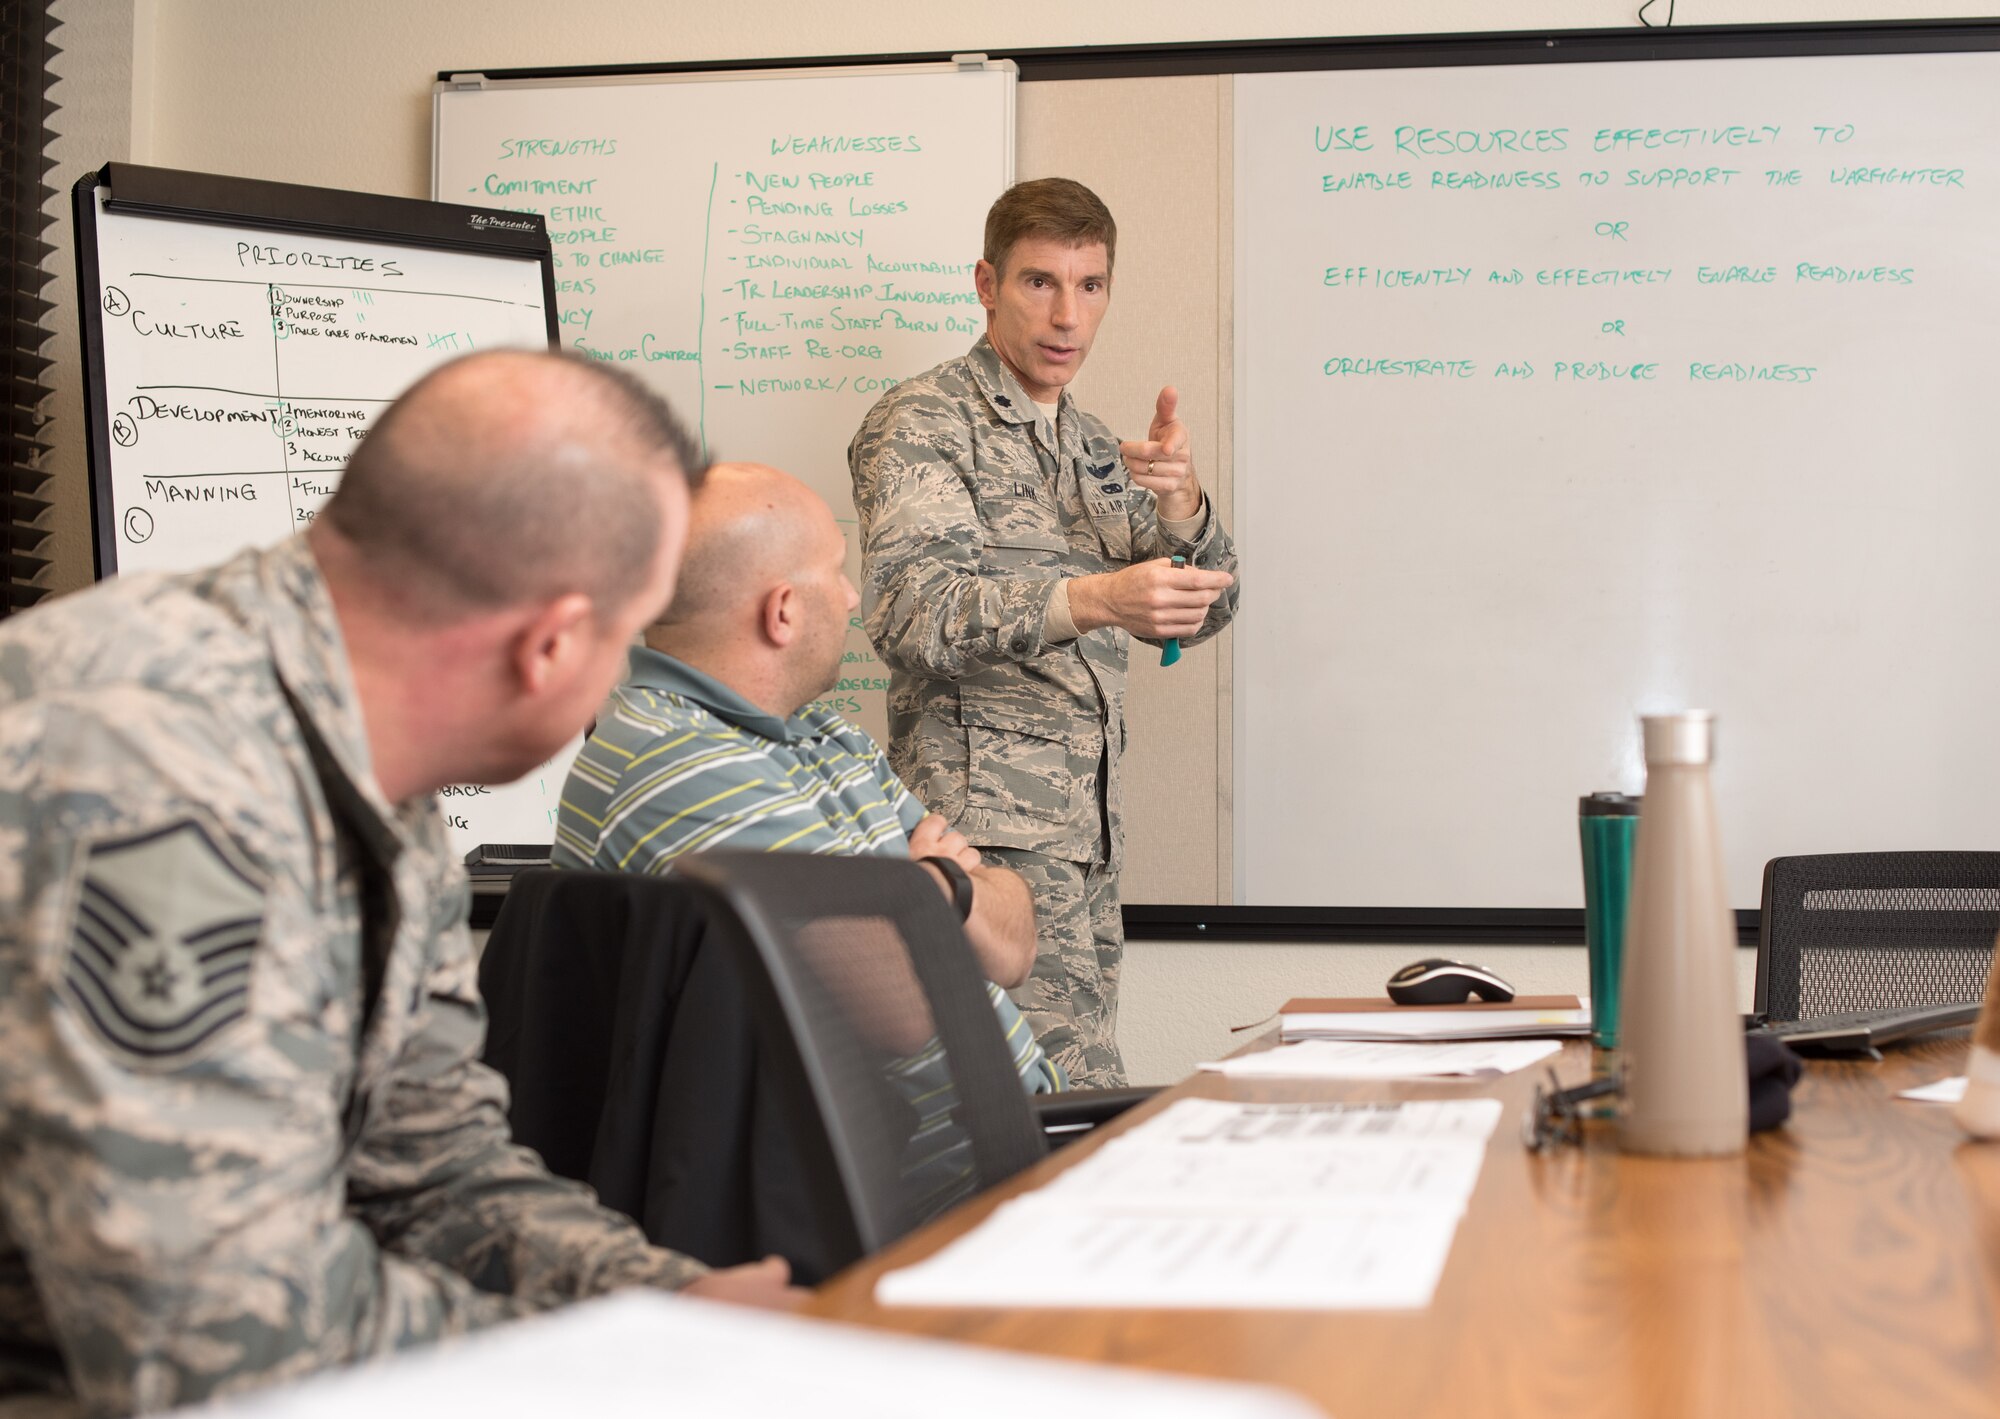 Lt. Col. Wil Link, 349th Air Mobility Wing process manager, facilitates a strategic alignment event with key 349th Mission Support Group staff at Travis Air Force Base, Calif. The Jan. 10, 2017 event helped the group craft mission and vision statements, as well as priorities for the 349th MSG. Link said Air Force continuous process methodology “helps the 349th AMW provide the maximum combat capability from each dollar spent.”